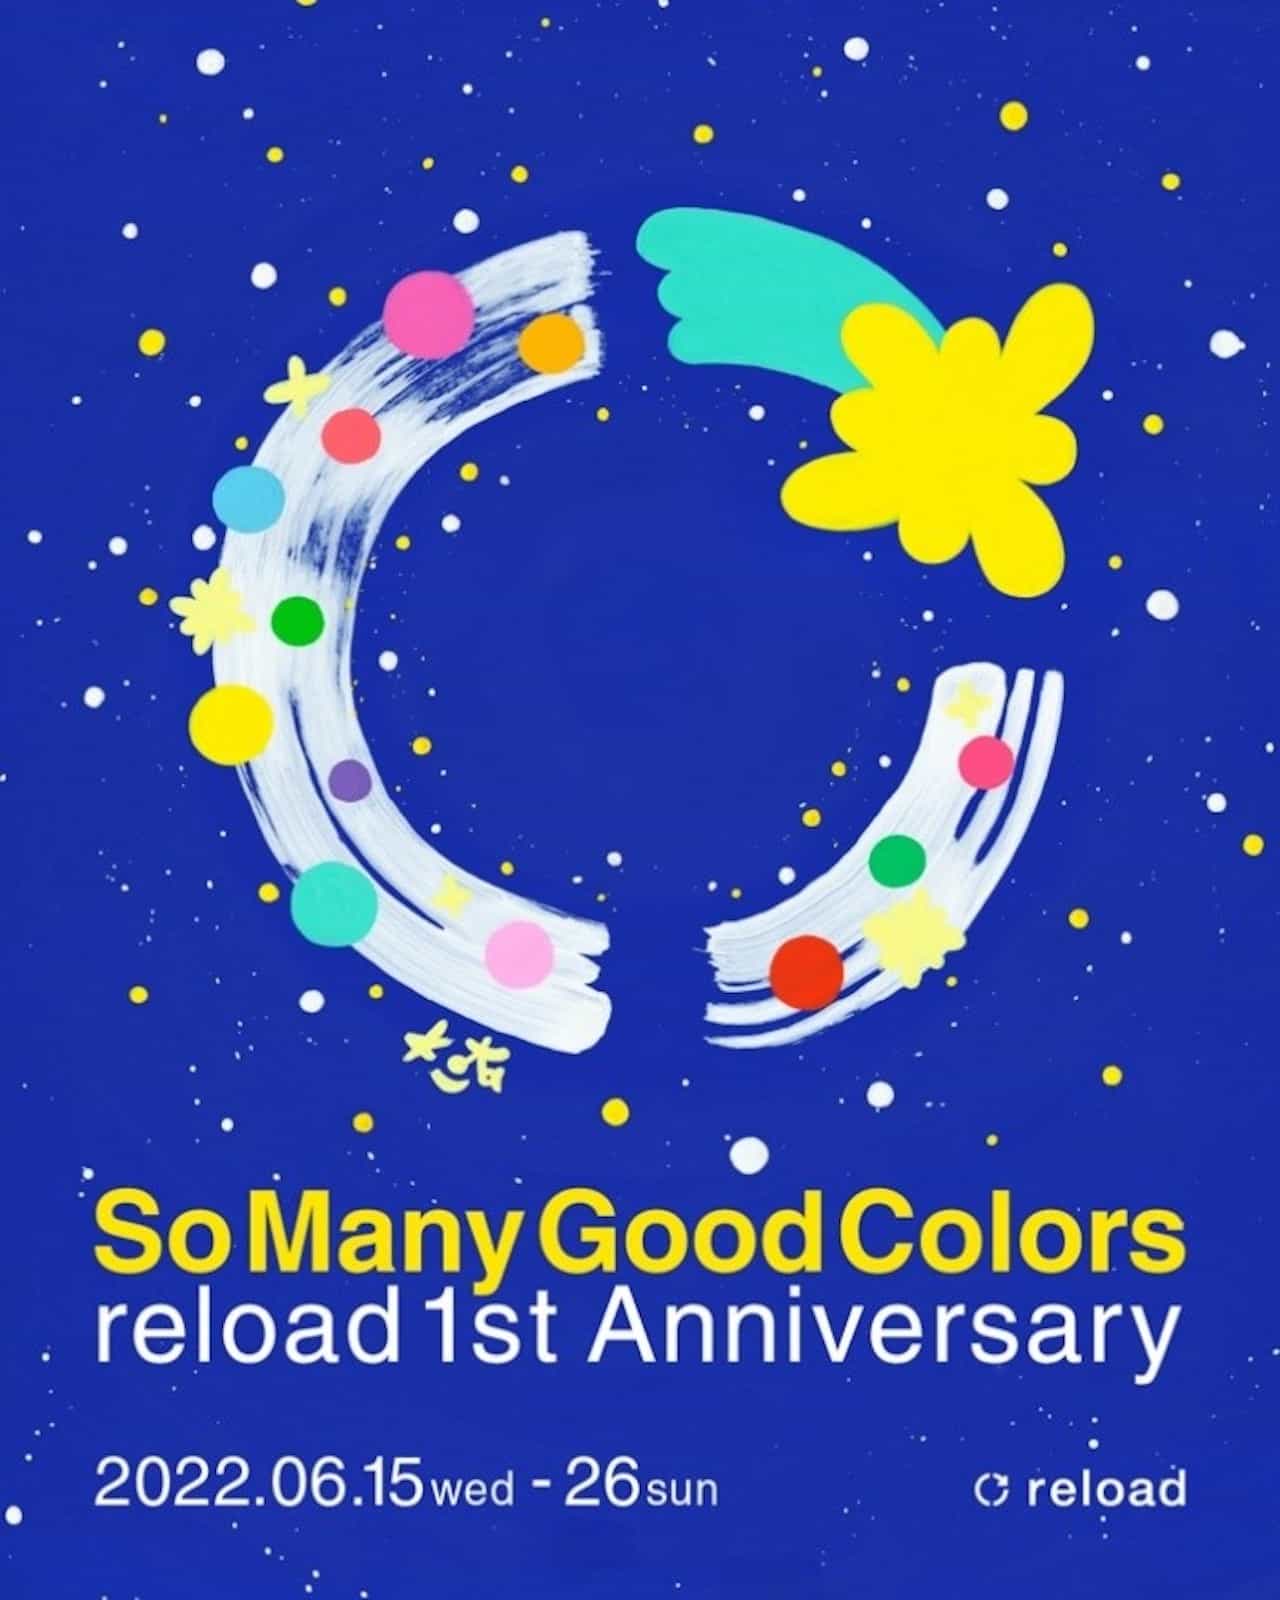 reload 1st Anniversary “So Many Good Colors”